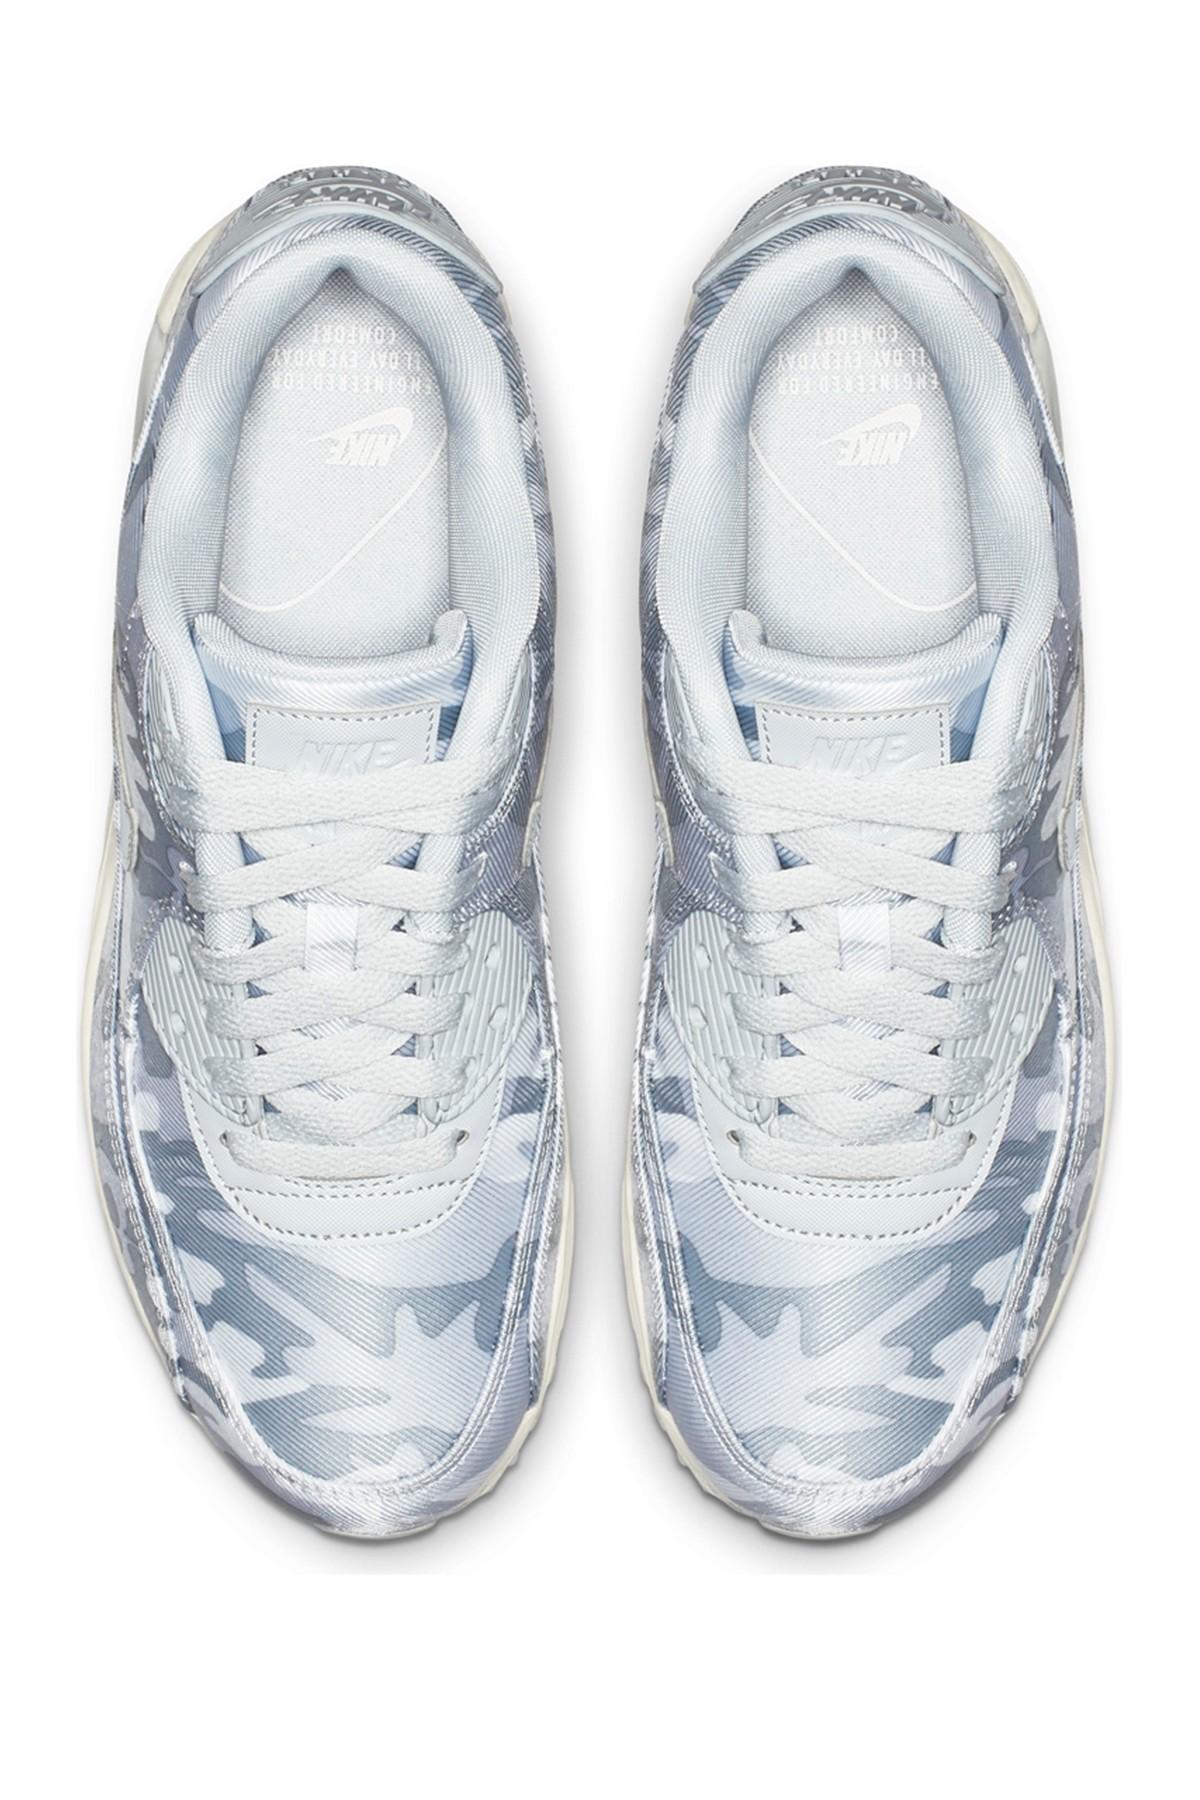 Nike Rubber Air Max 90 Cse Sneaker in White - Lyst